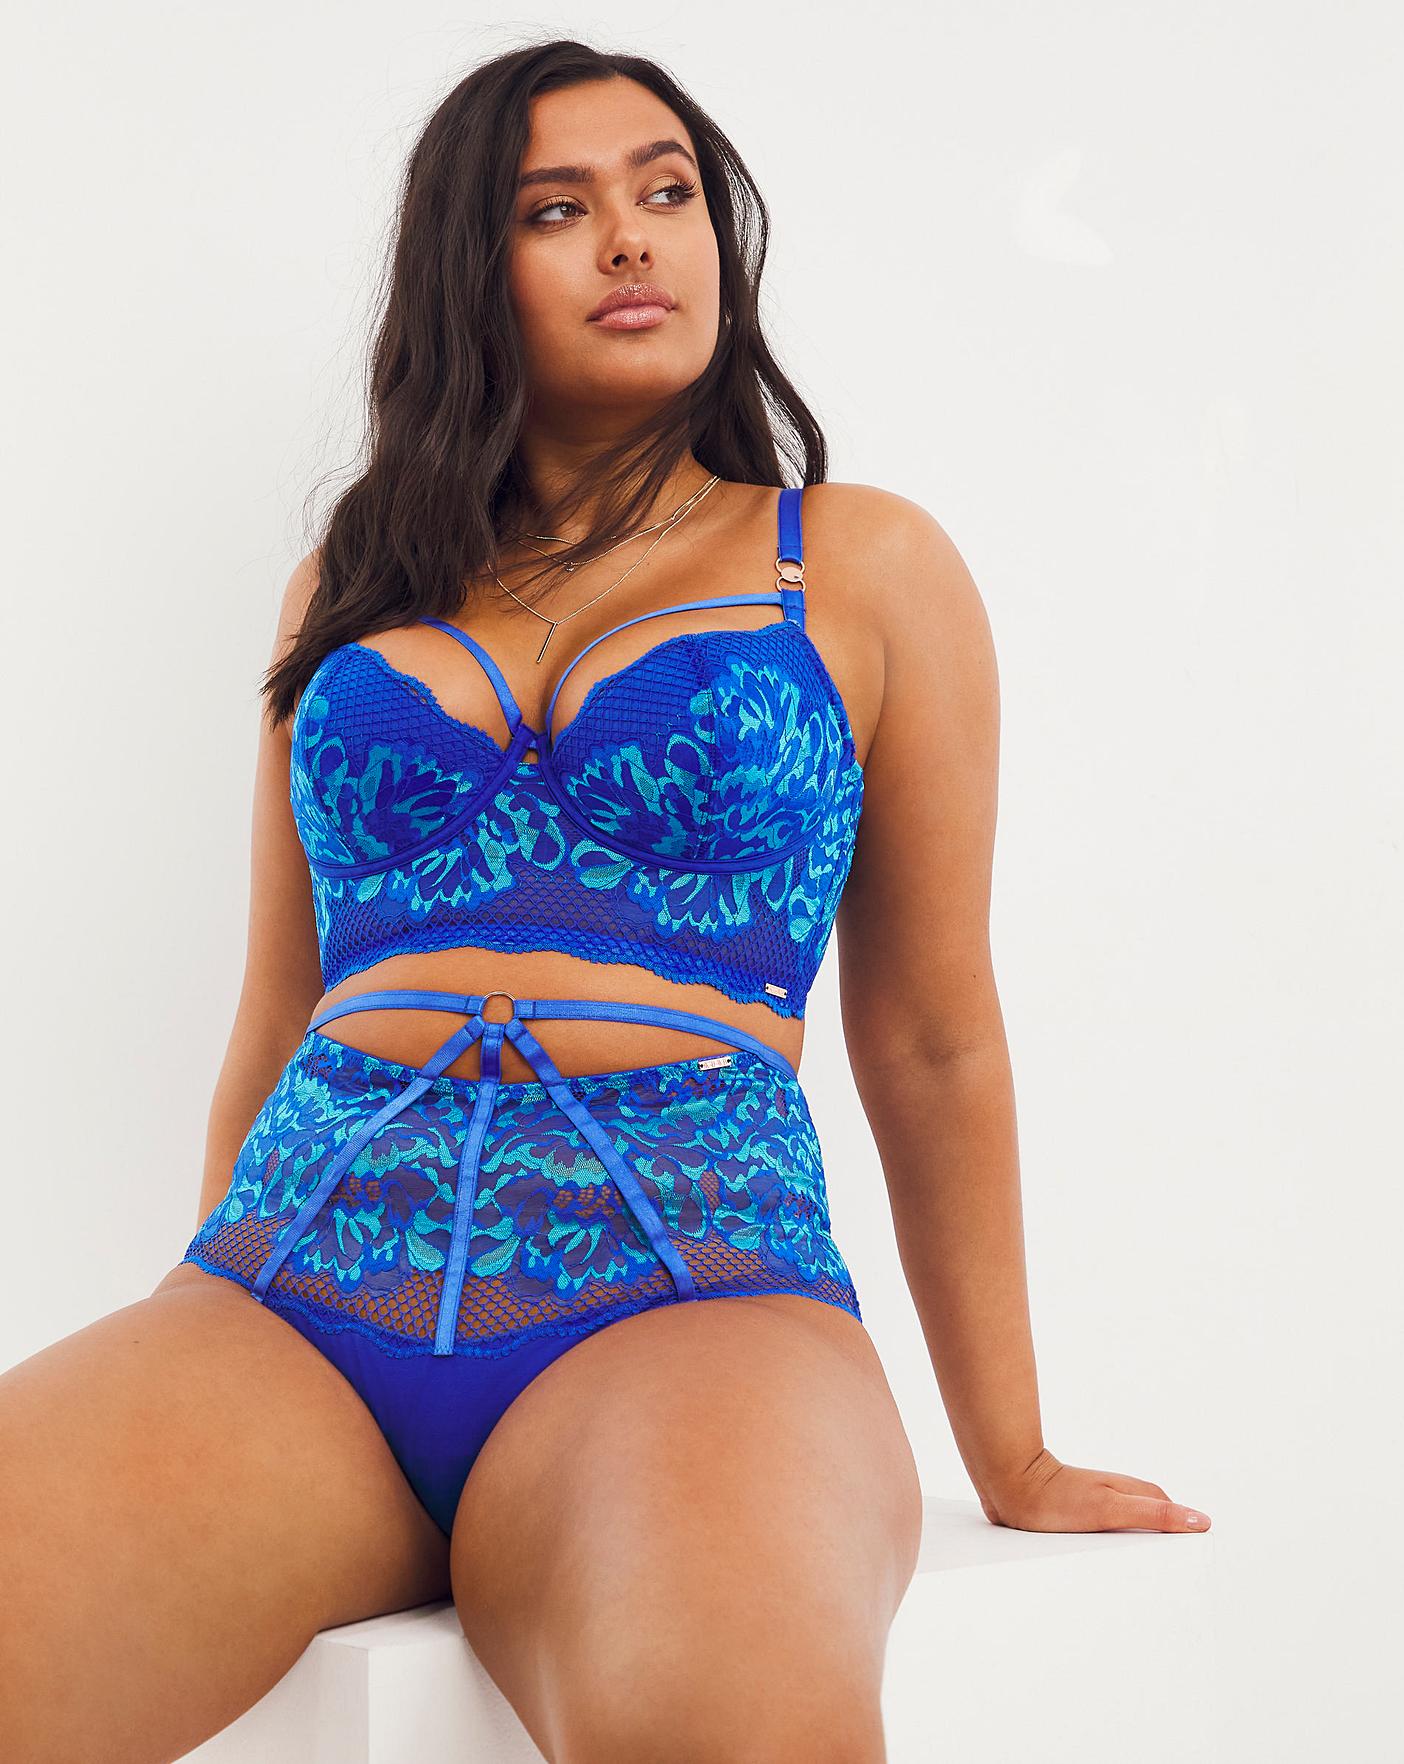 Figleaves Curve Lace & Fishnet Front Fastening Bra in Shoking Blue, Women's  Fashion, New Undergarments & Loungewear on Carousell